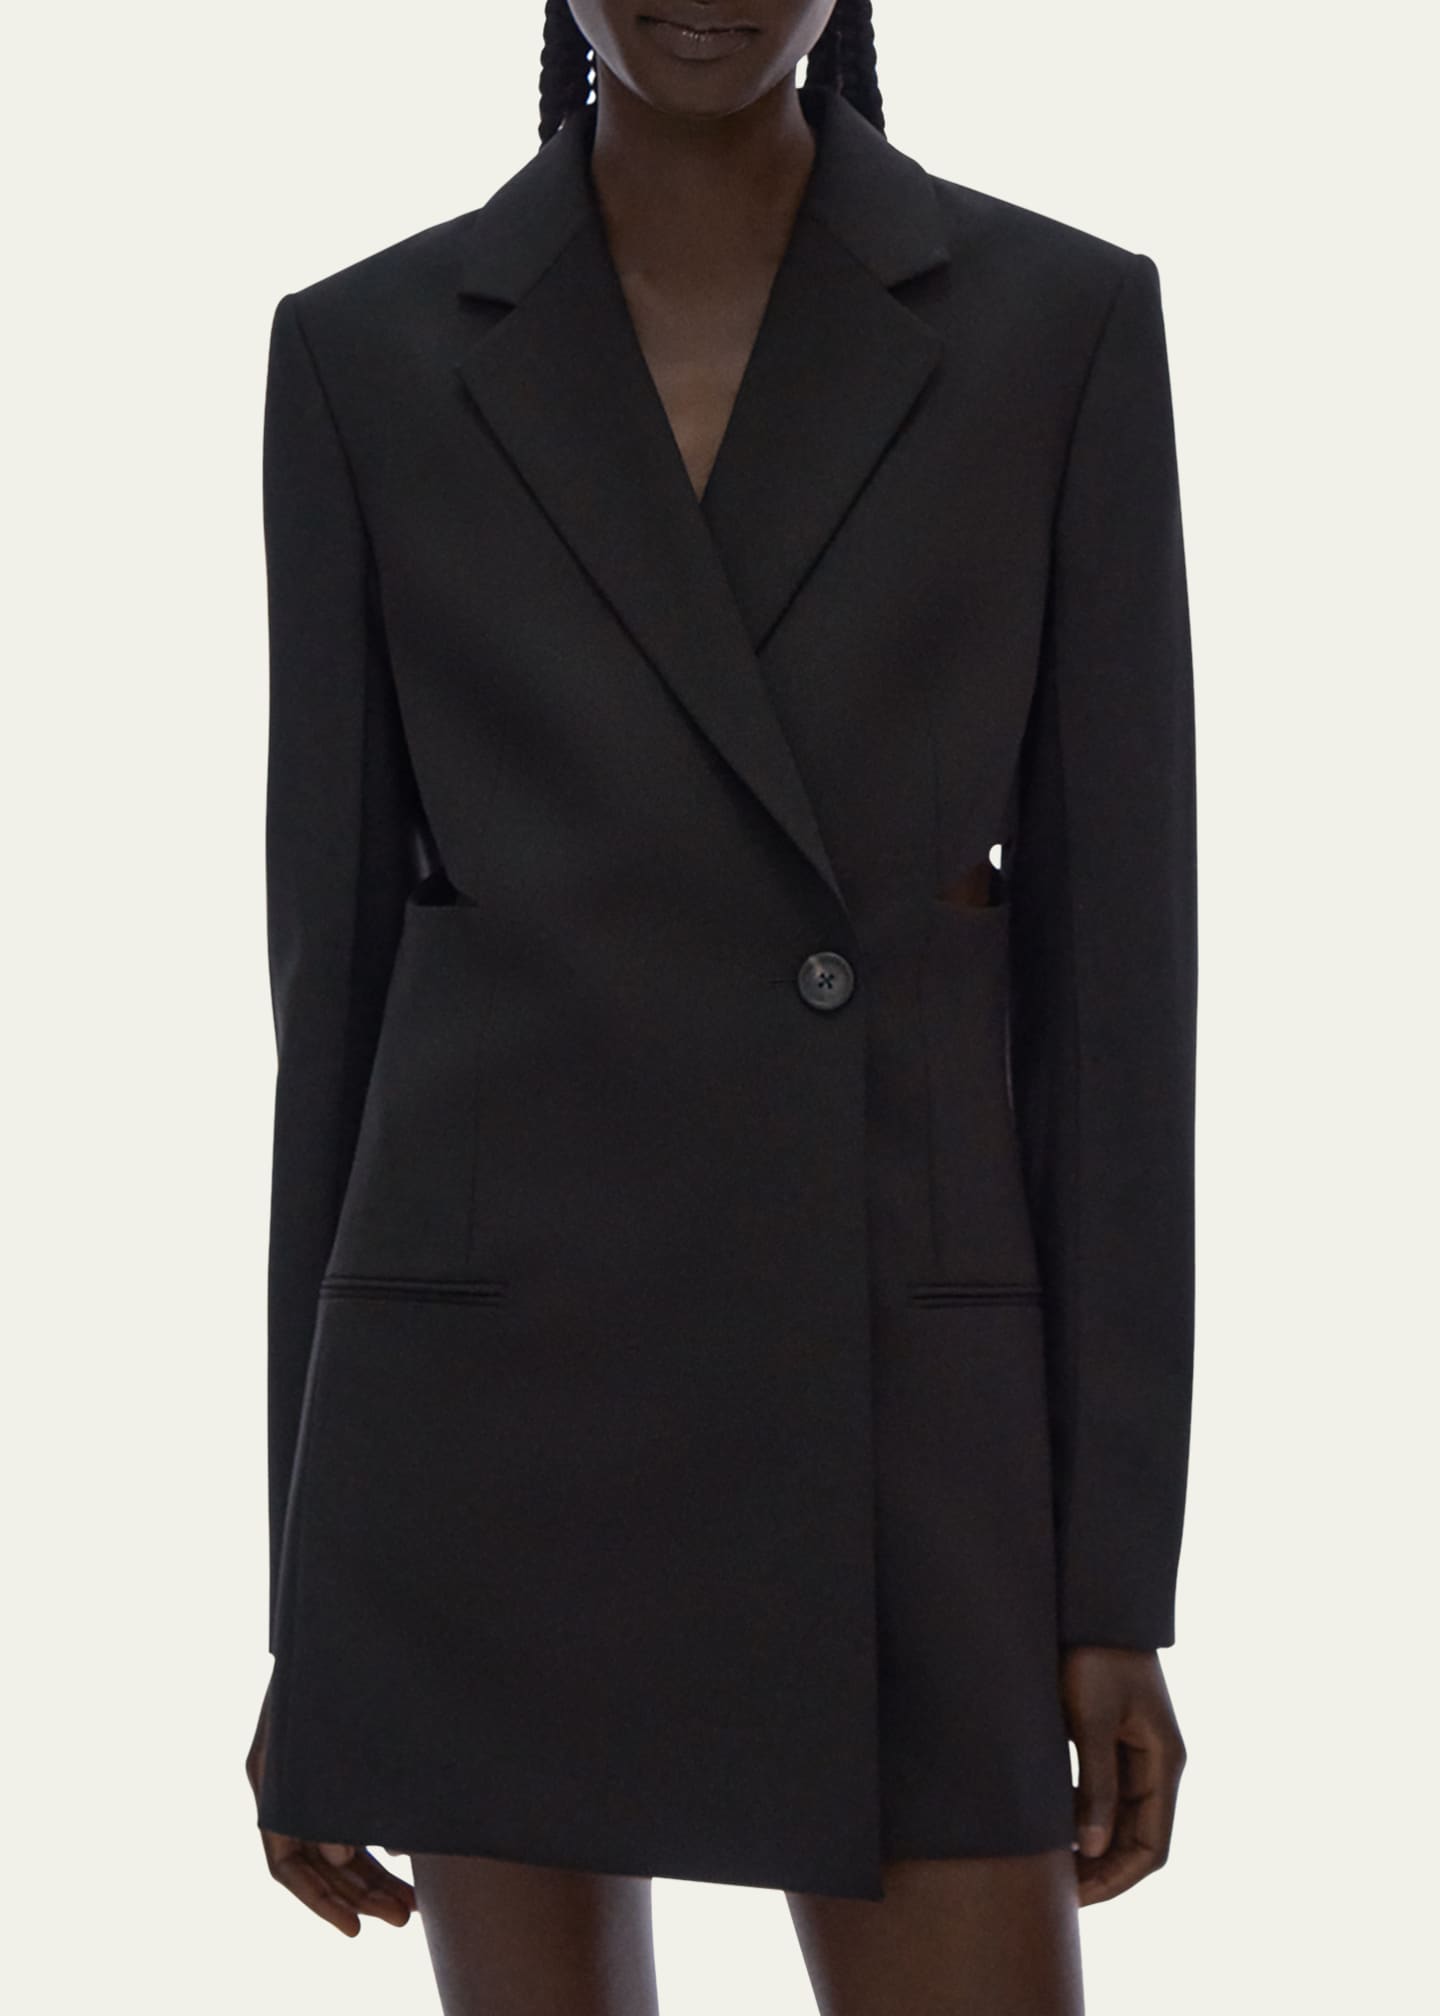 Helmut Lang for Women SS24 Collection